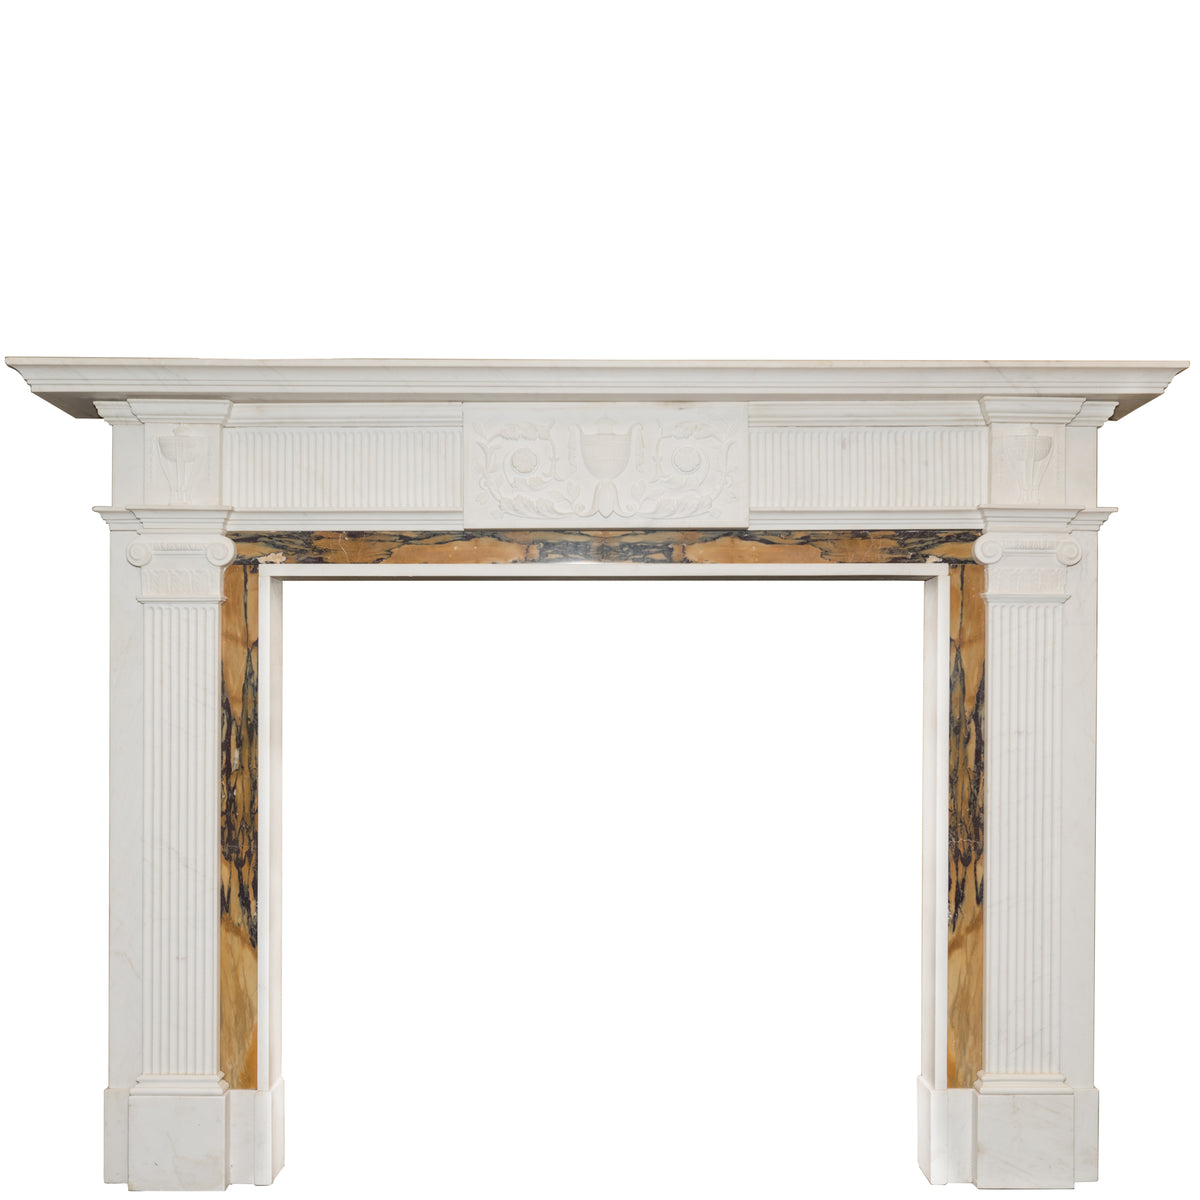 Georgian Style Statutory &amp; Sienna Marble Fireplace Surround | The Architectural Forum